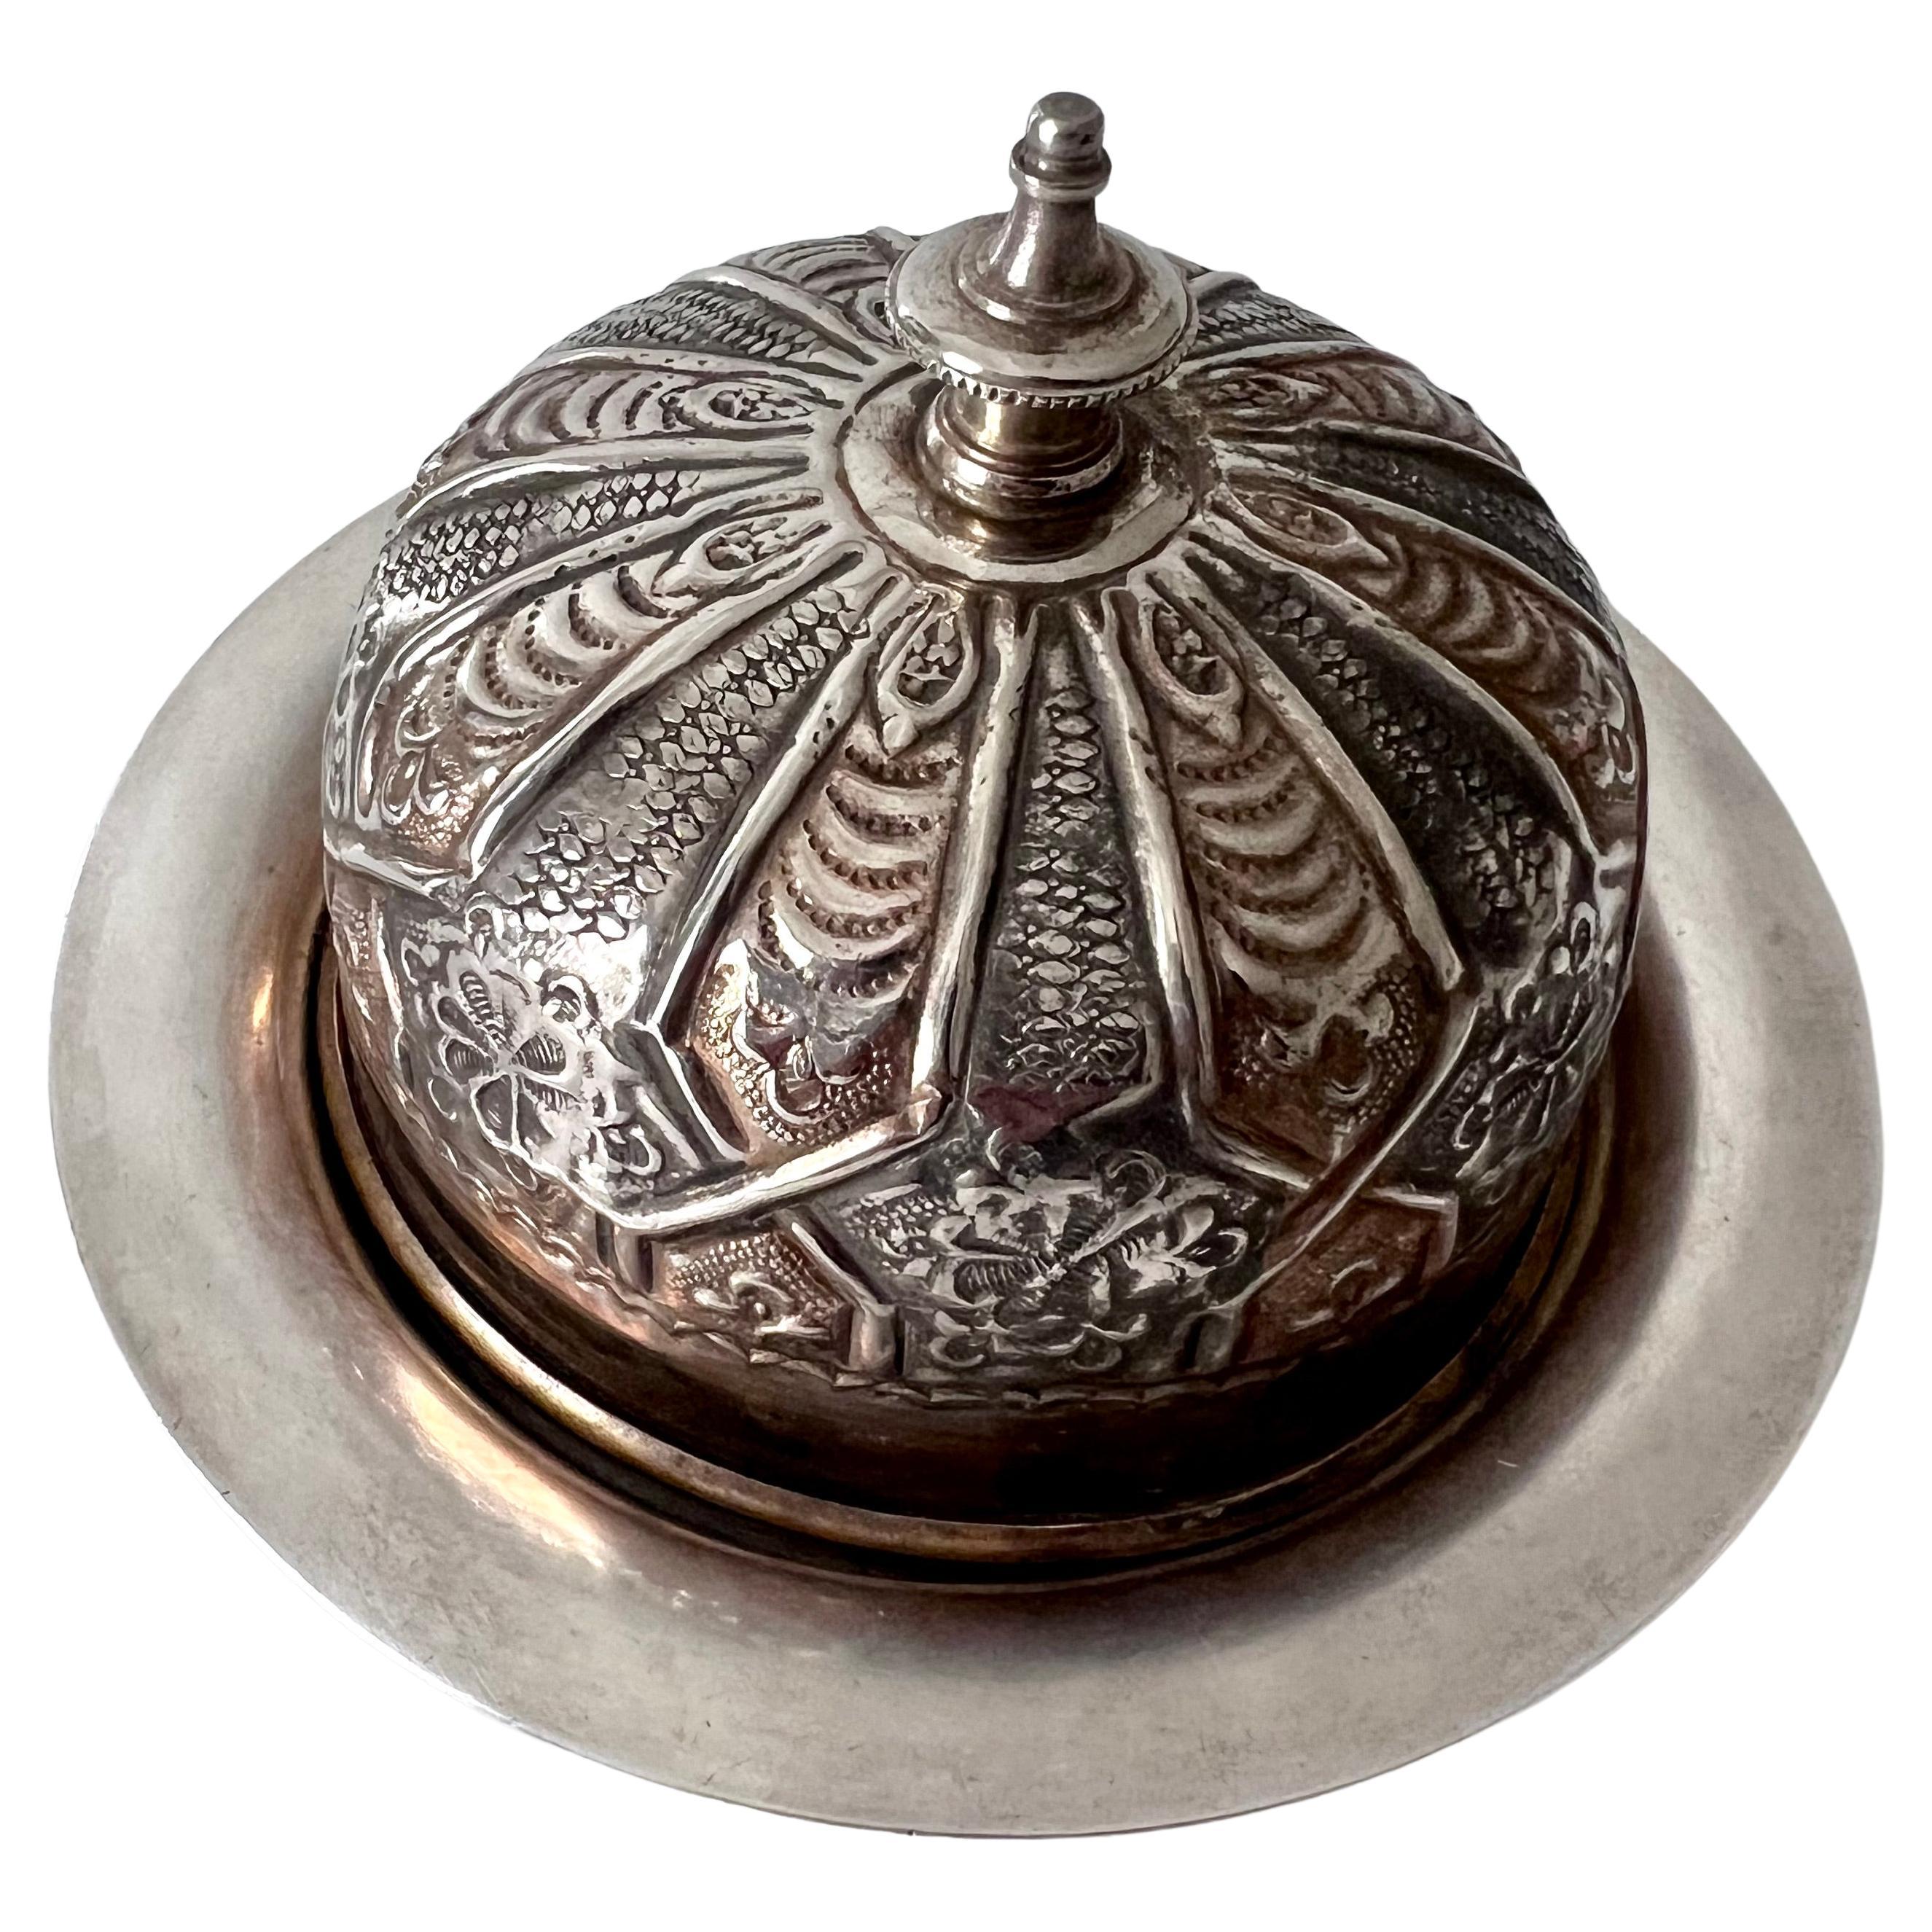 Domed French Silver Plate Repoussé Butter or Covered Dish Plate